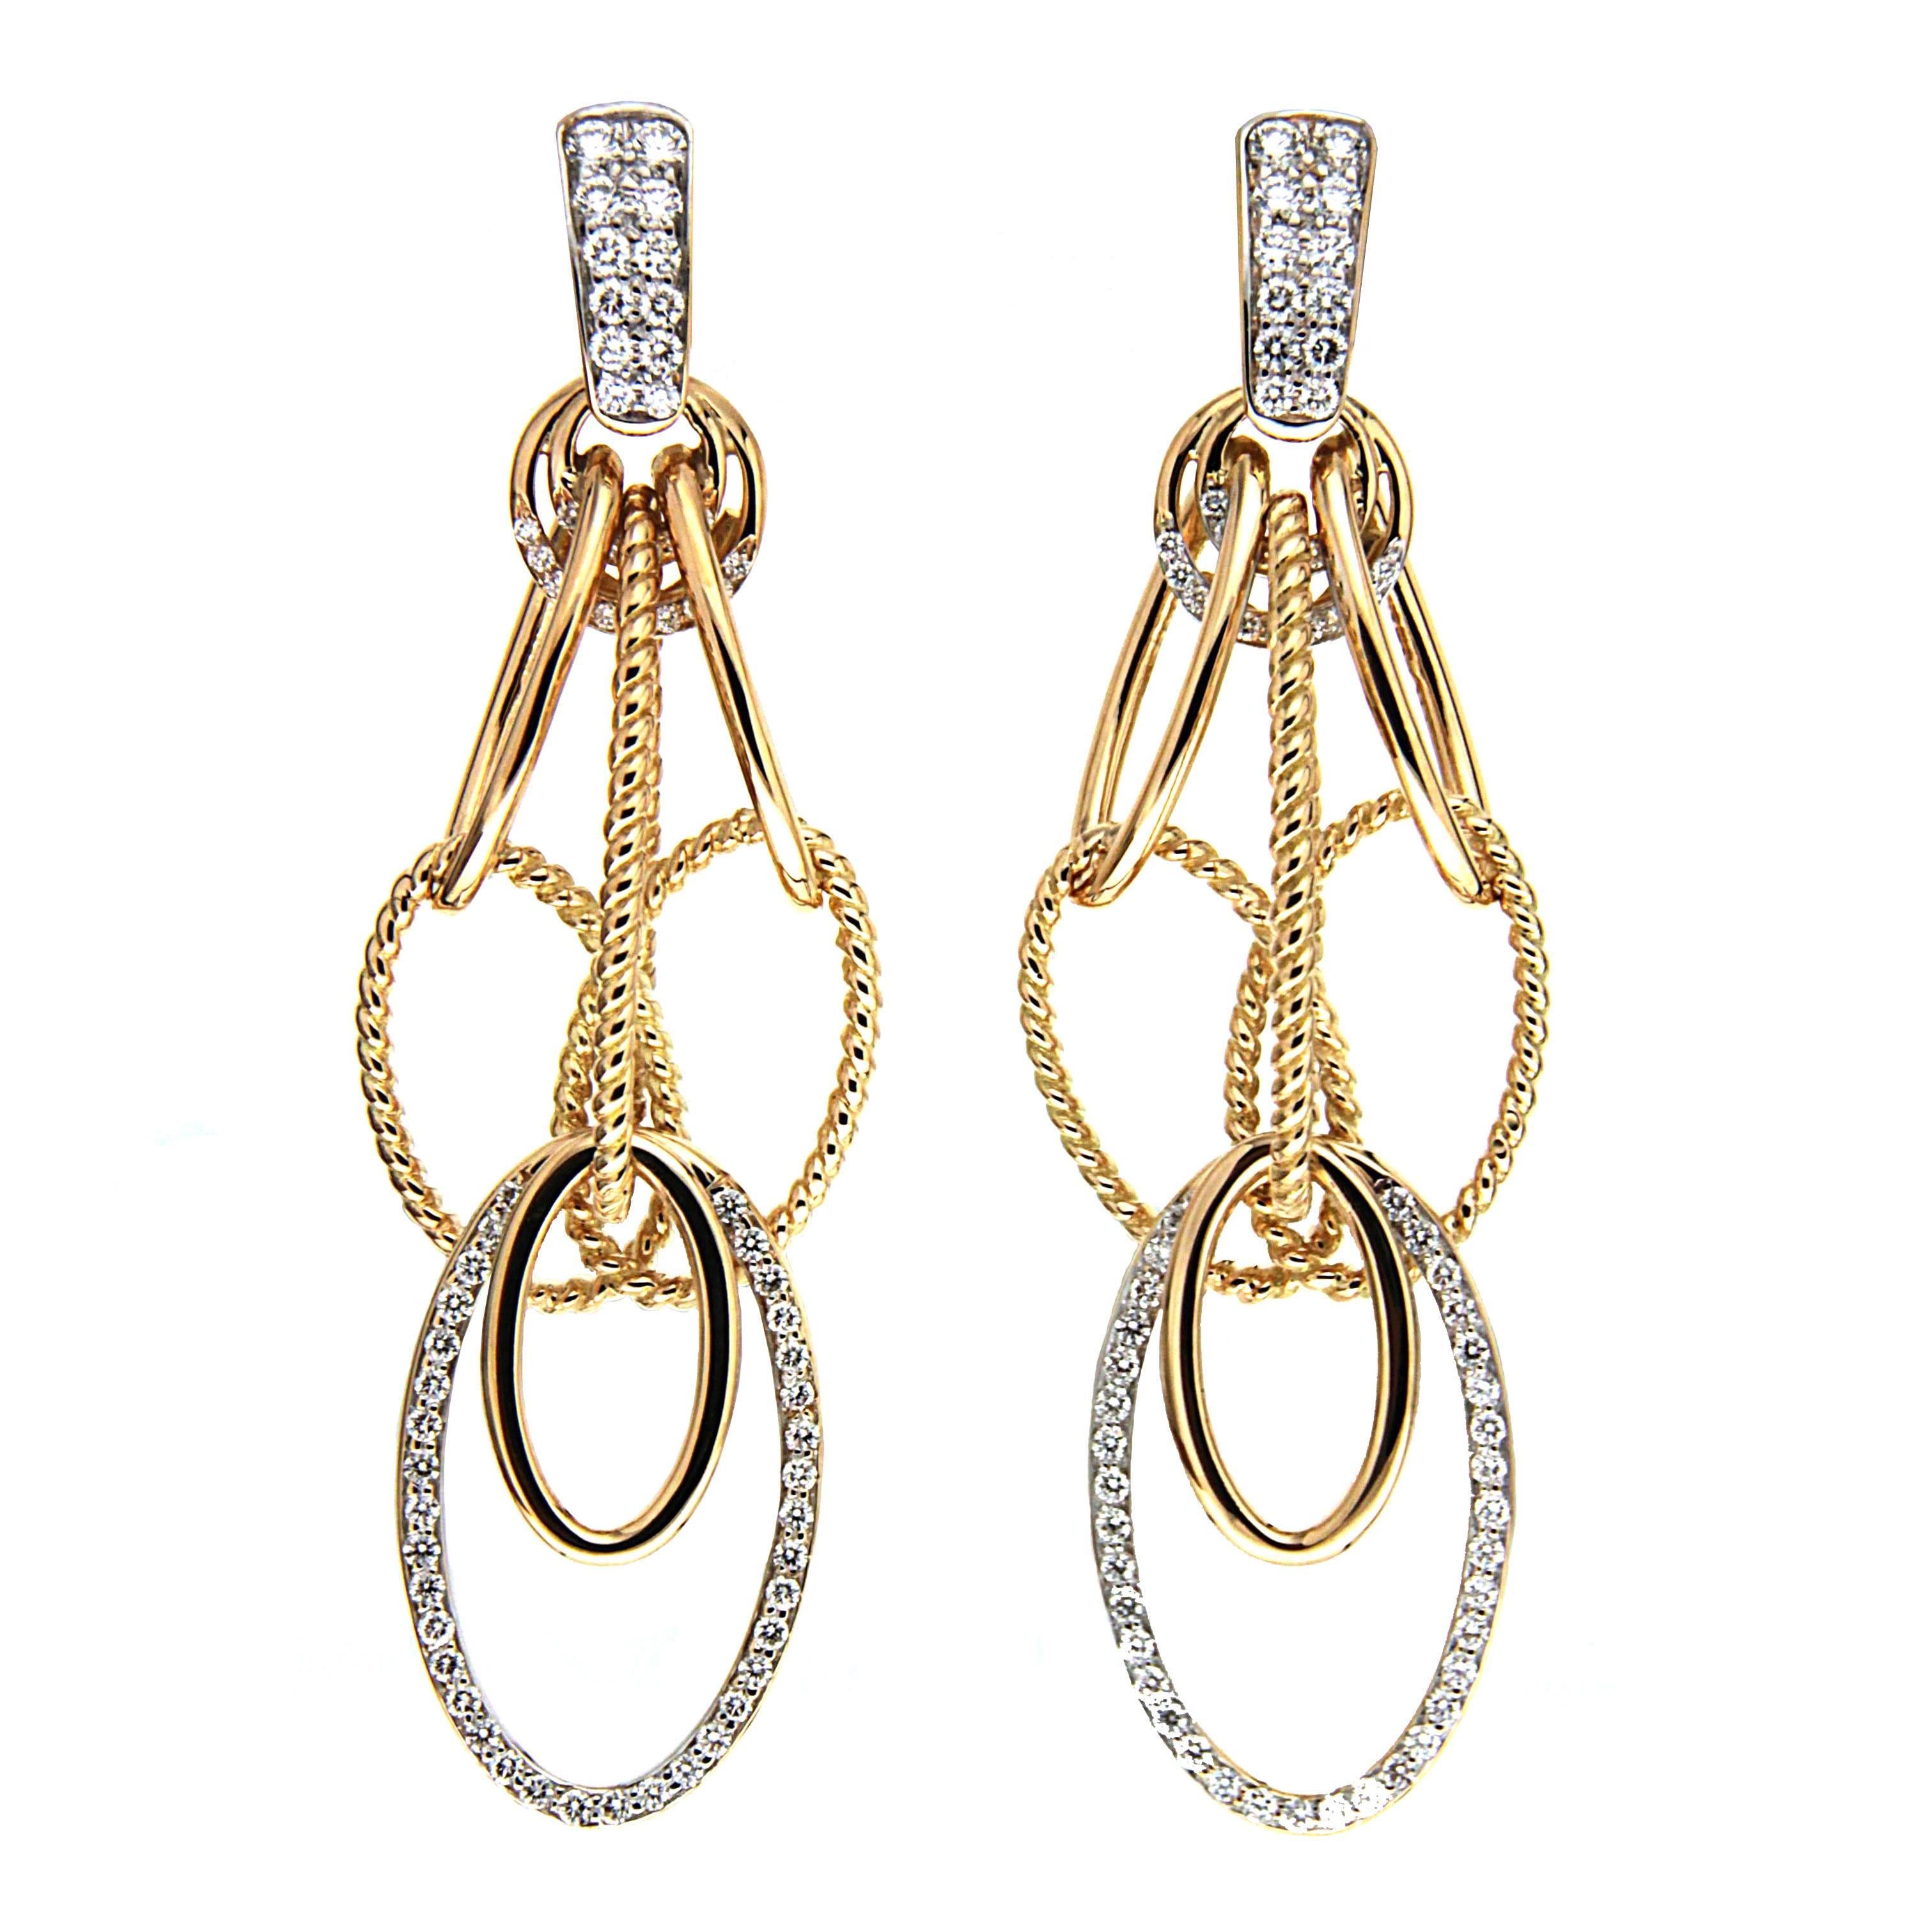 Valentin Magro Cascading Oval Twisted & Plain Wire Diamond Gold Earrings ‘Small’